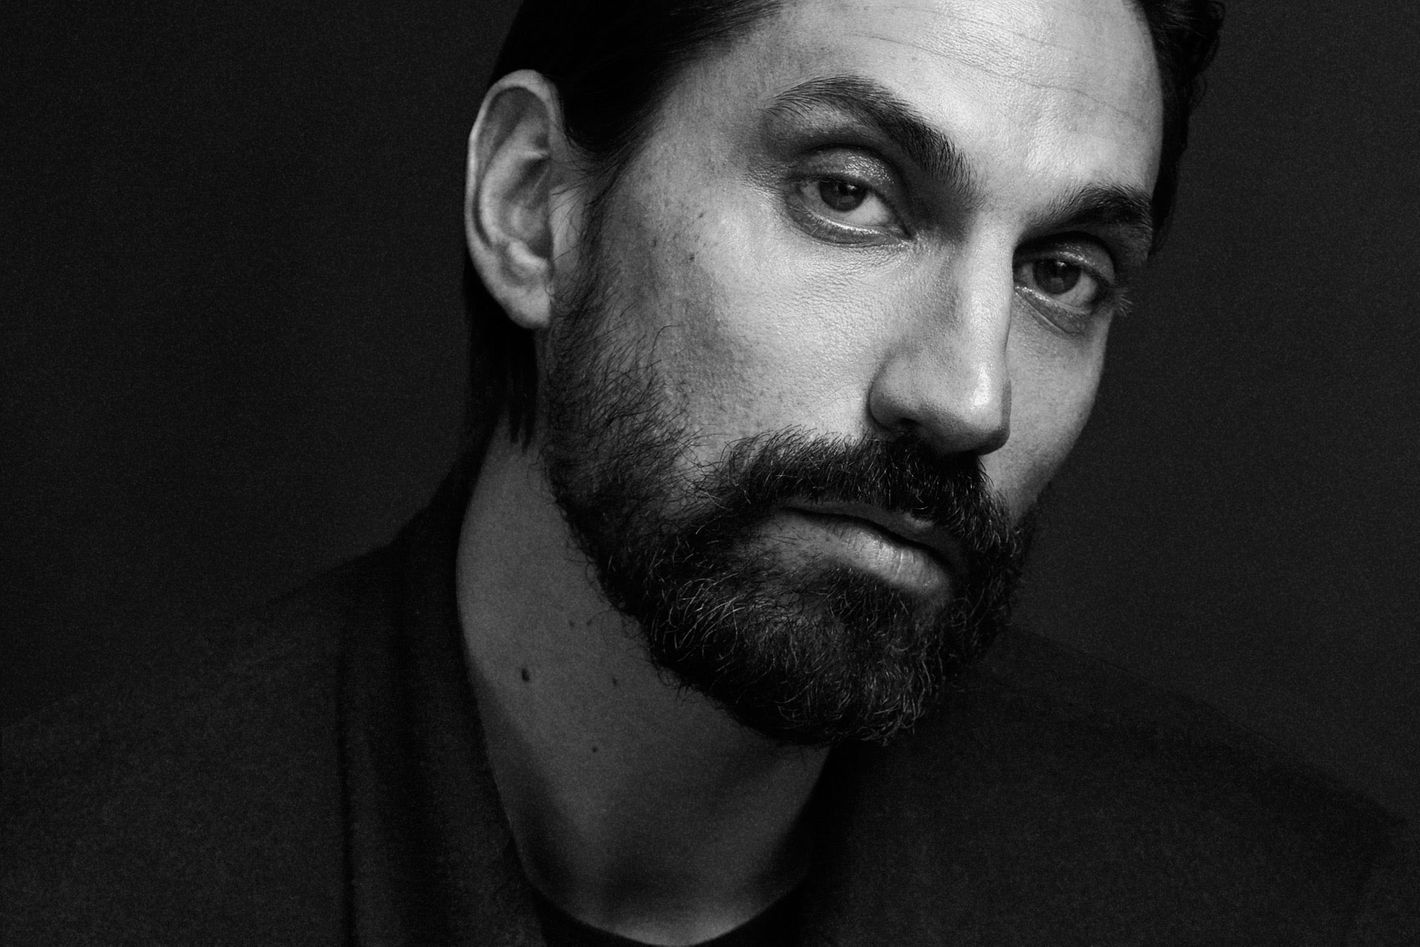 Ben Gorham of Byredo Shares a Life Story Inspired By Design